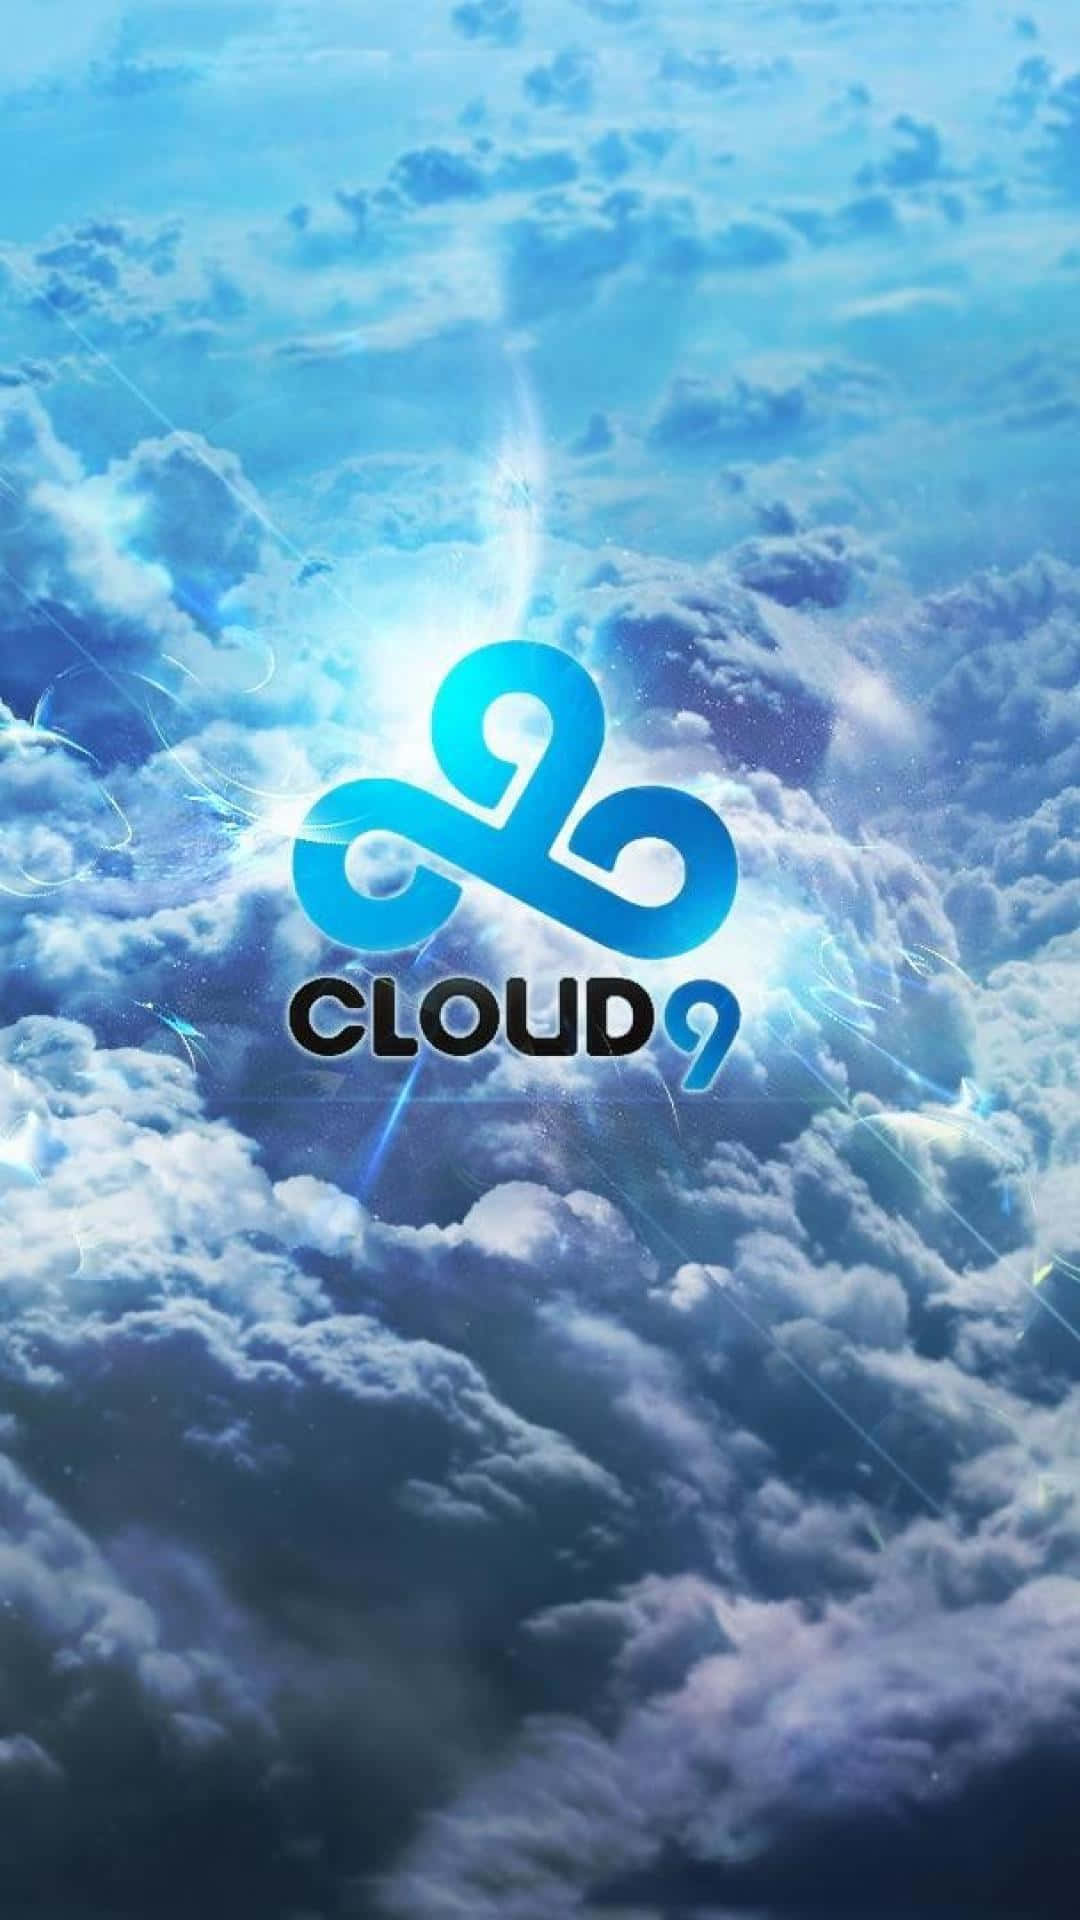 Reach Cloud 9 with the perfect balance of relaxation and tranquility Wallpaper